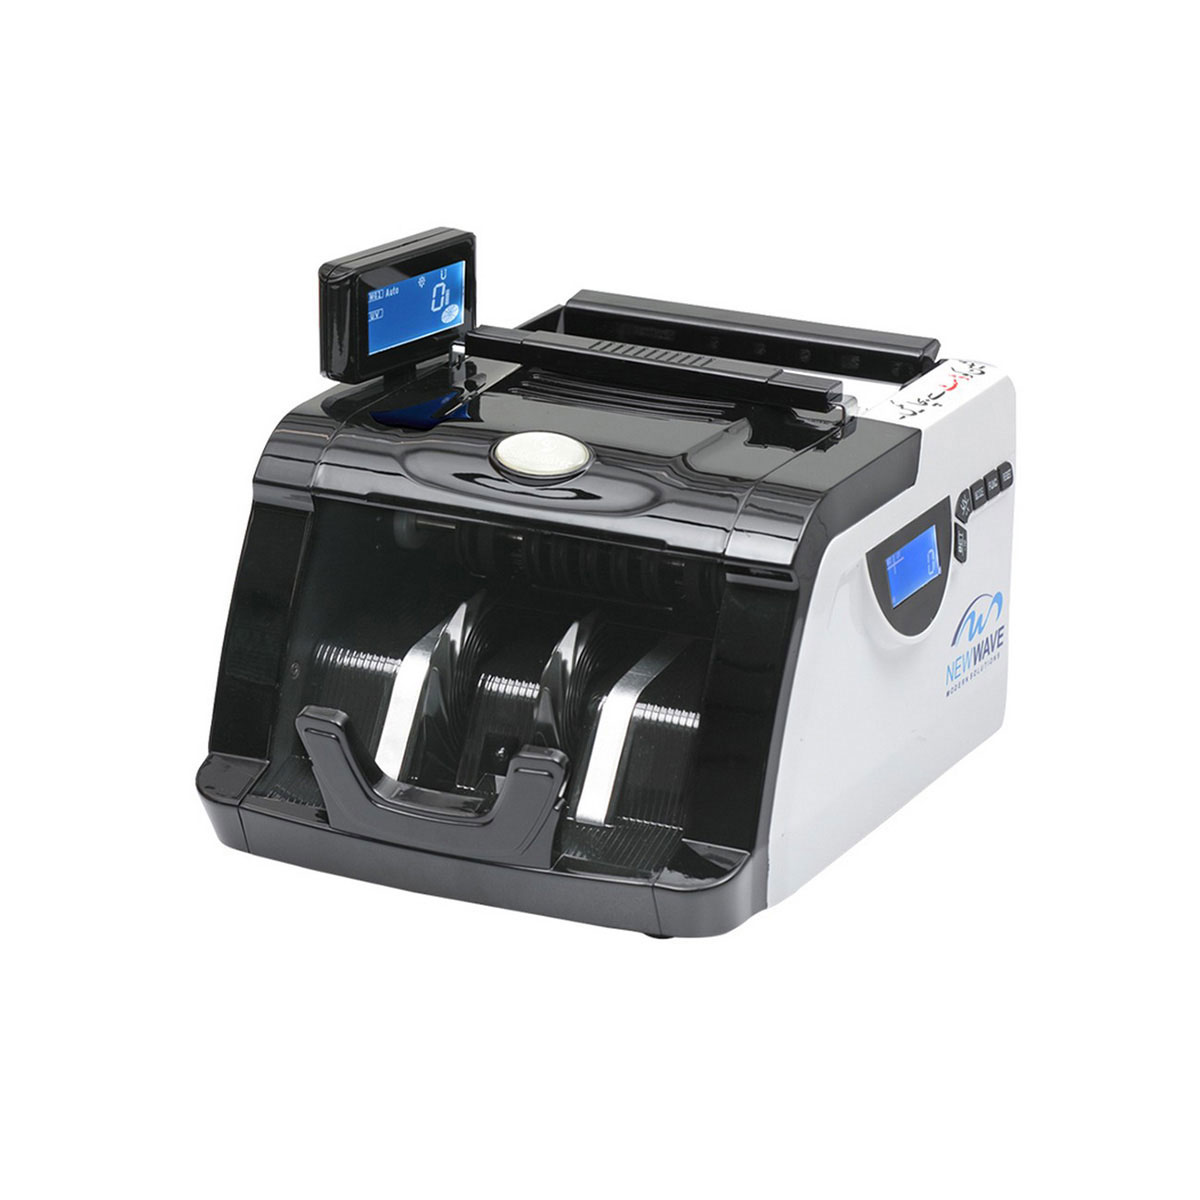 Cash Counting Machine,bill Counter,money Counter And Detector.(nw-6200)